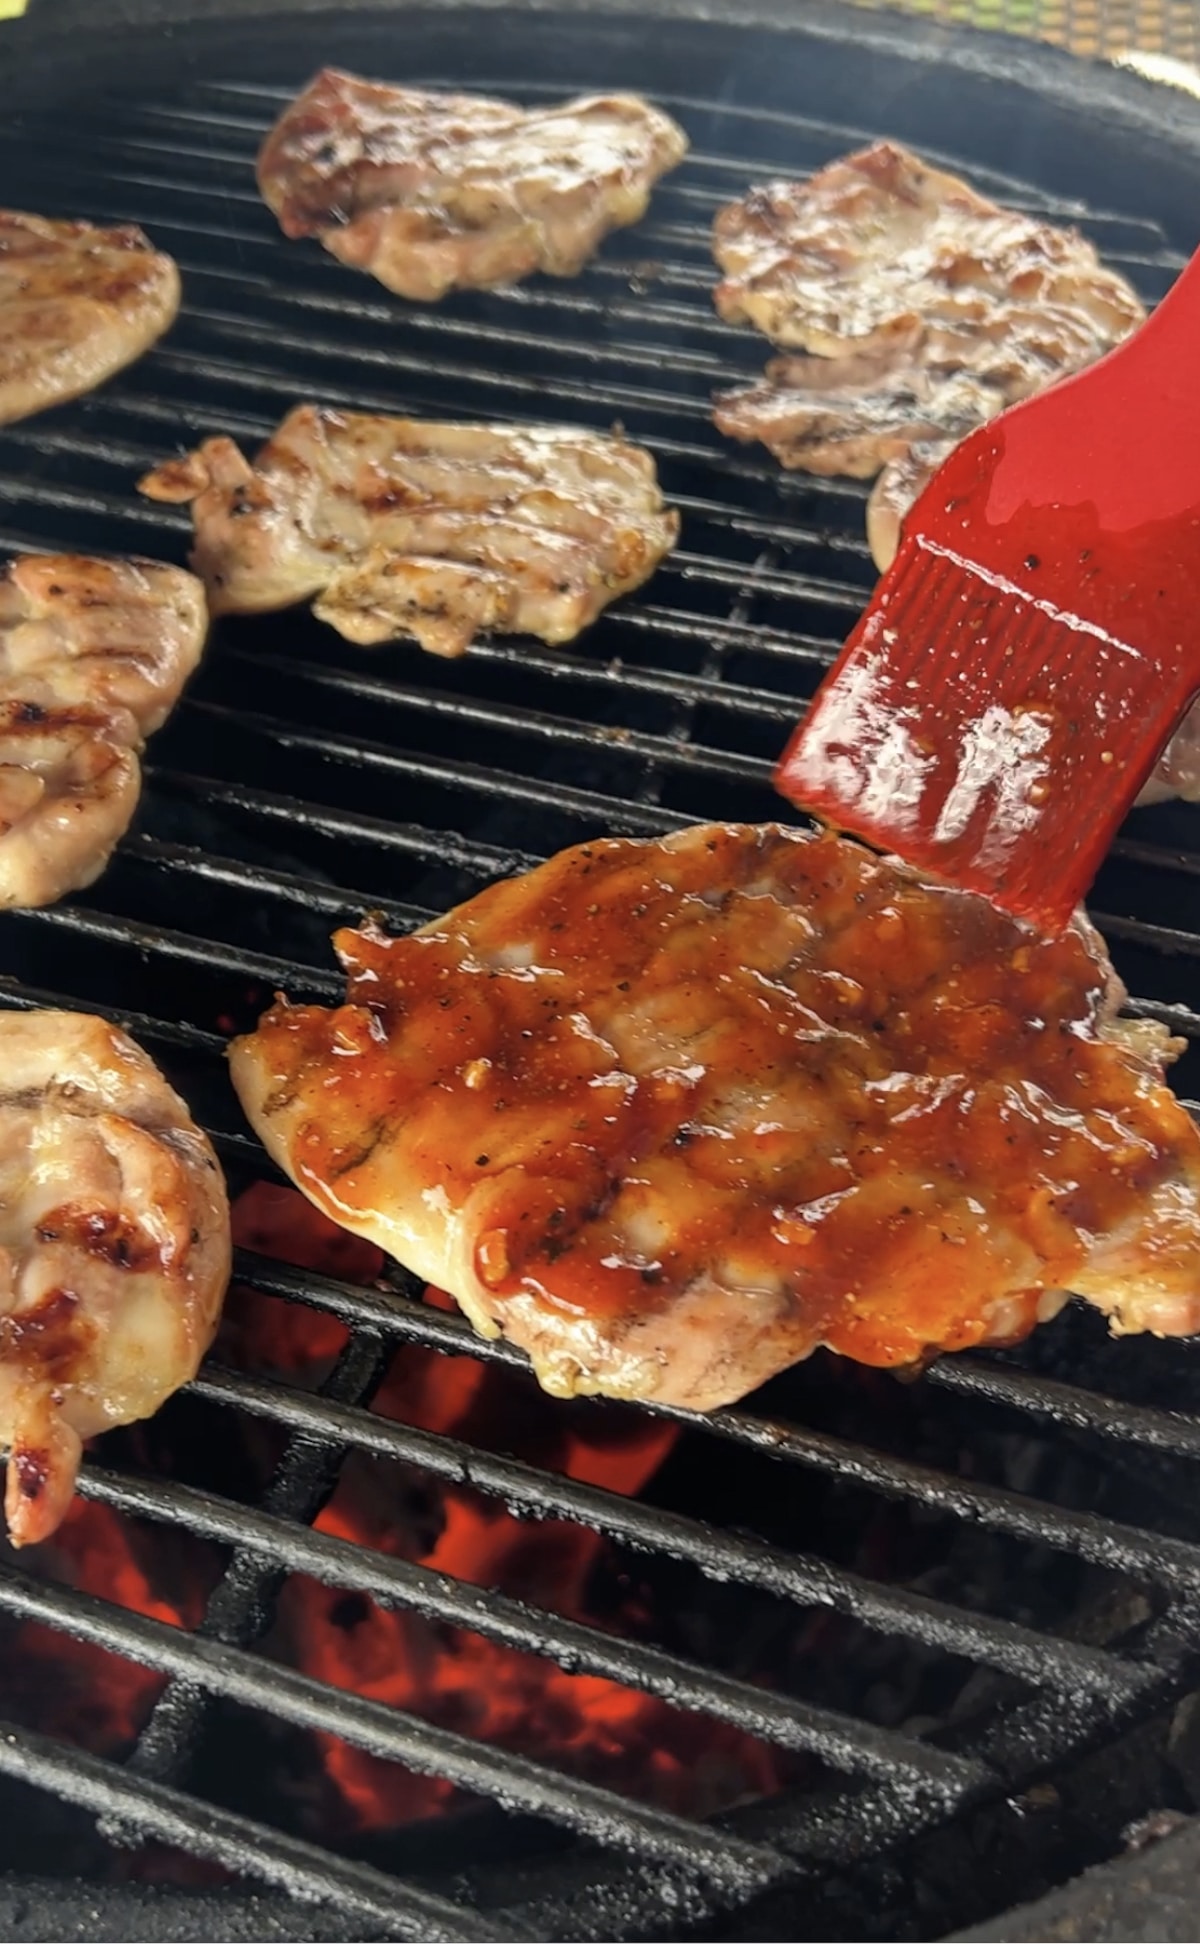 Brushing BBQ sauce onto chicken thighs on grill.